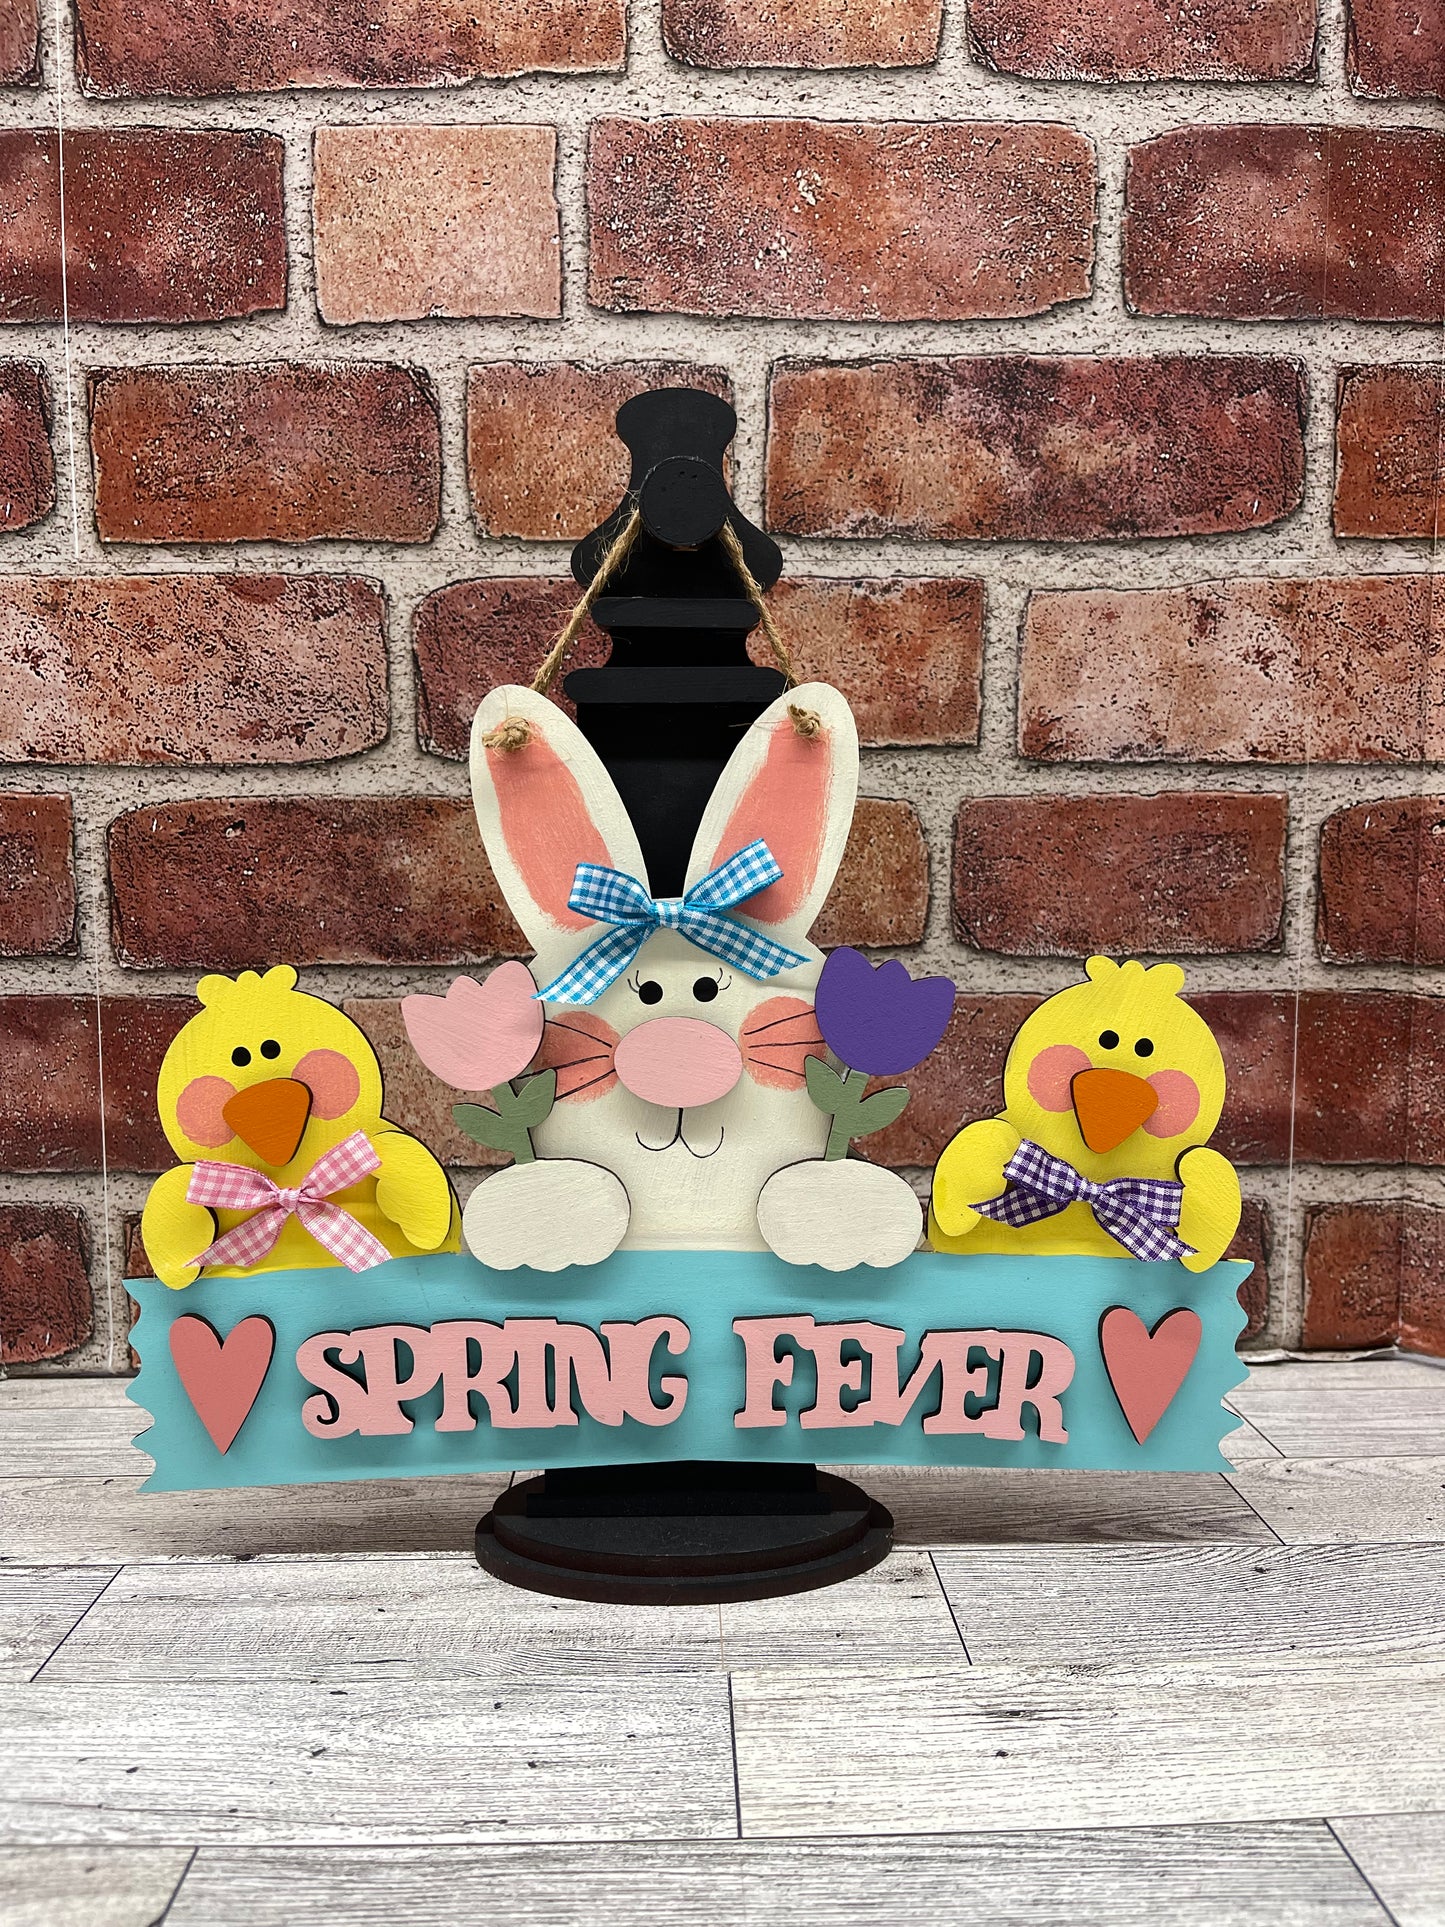 Spring Fever - Easter Door Sign - Wood Cutouts unpainted ready for you to paint